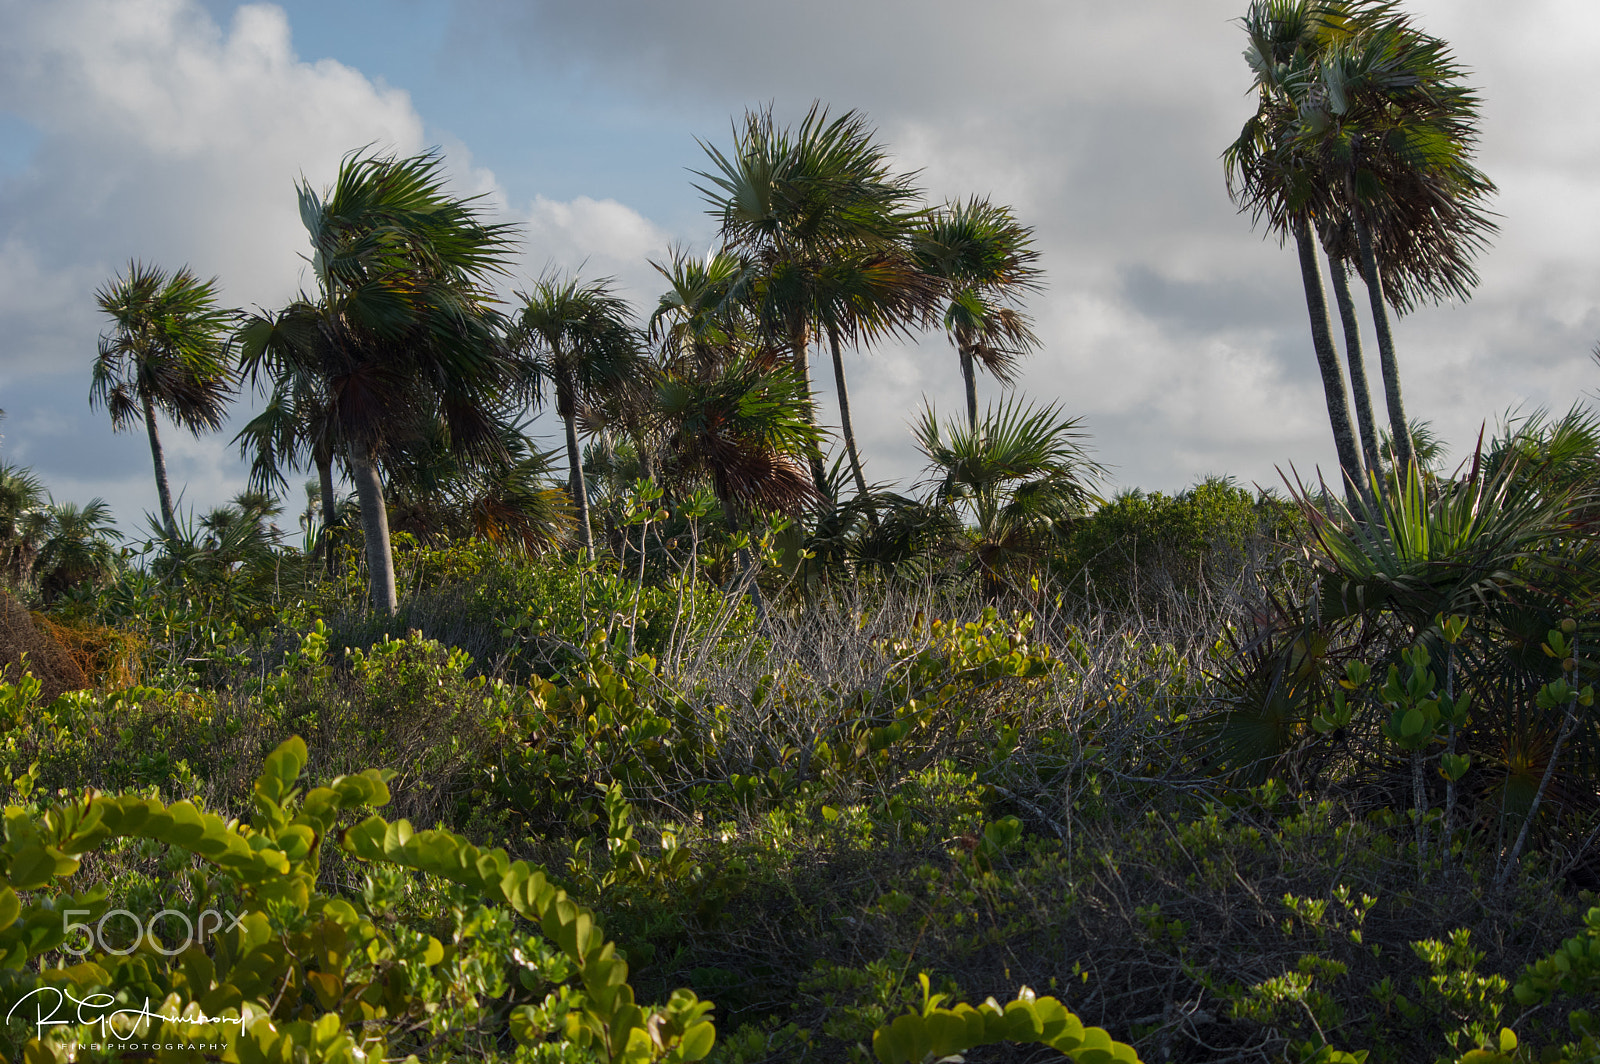 Pentax K-3 II sample photo. Cayo coco landscapes photography